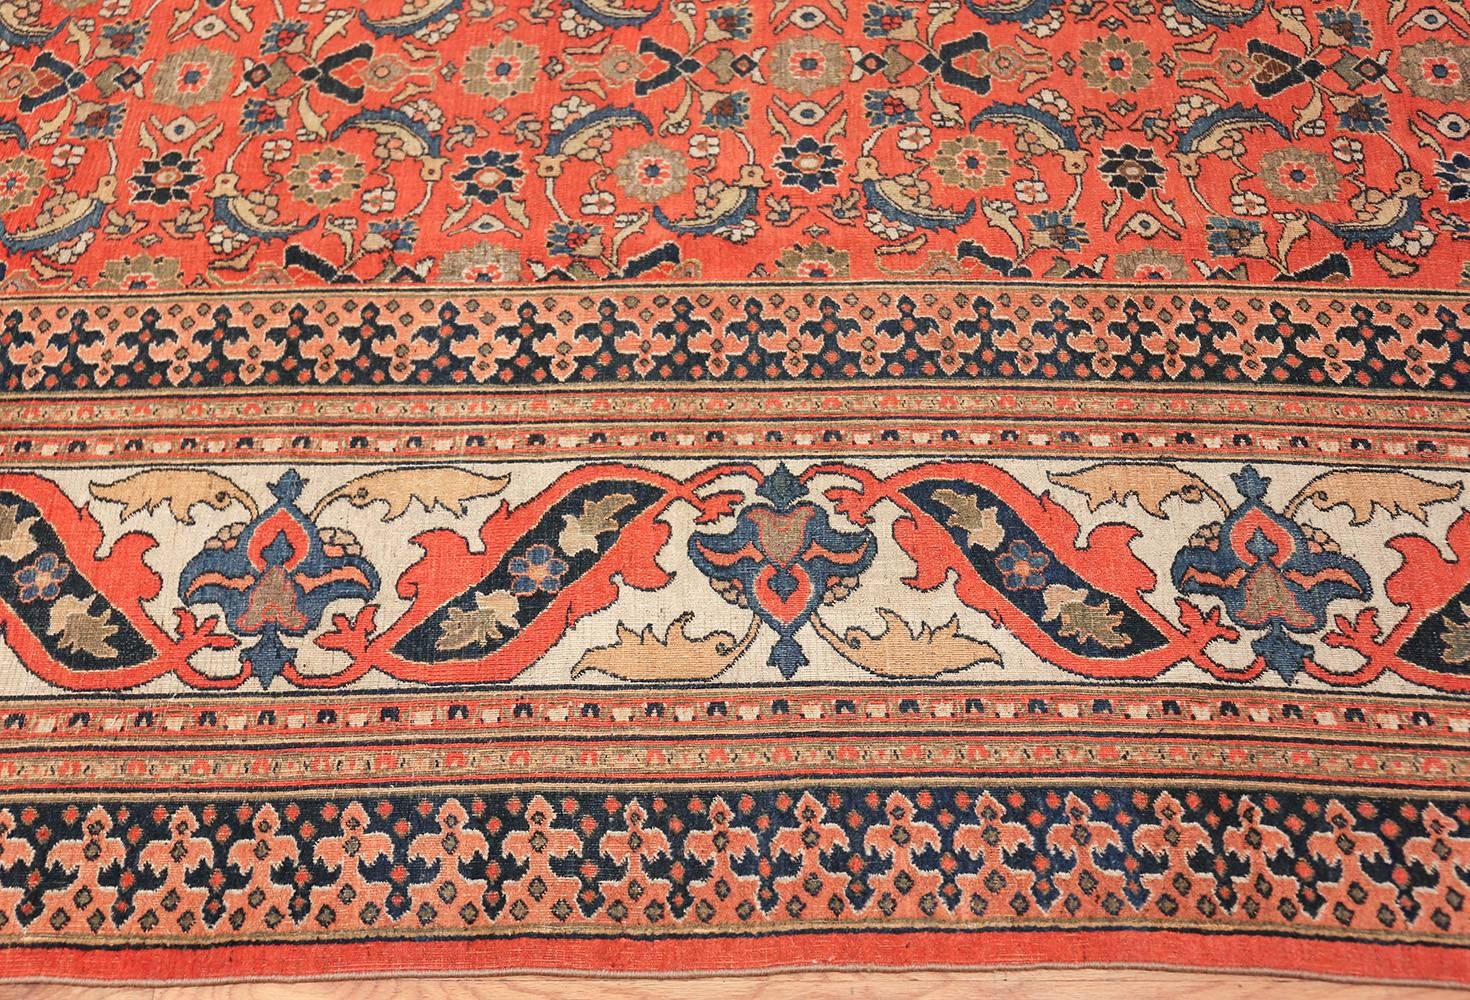 Antique Persian Khorassan Carpet, Circa Early 20th Century — Size: 9 ft 10 in x 13 ft 9 in (3 m x 4.19 m)

The foundation of this bold Khorassan carpet is a deep, sophisticated red, a color that fittingly denotes both warmth and strength. Strict